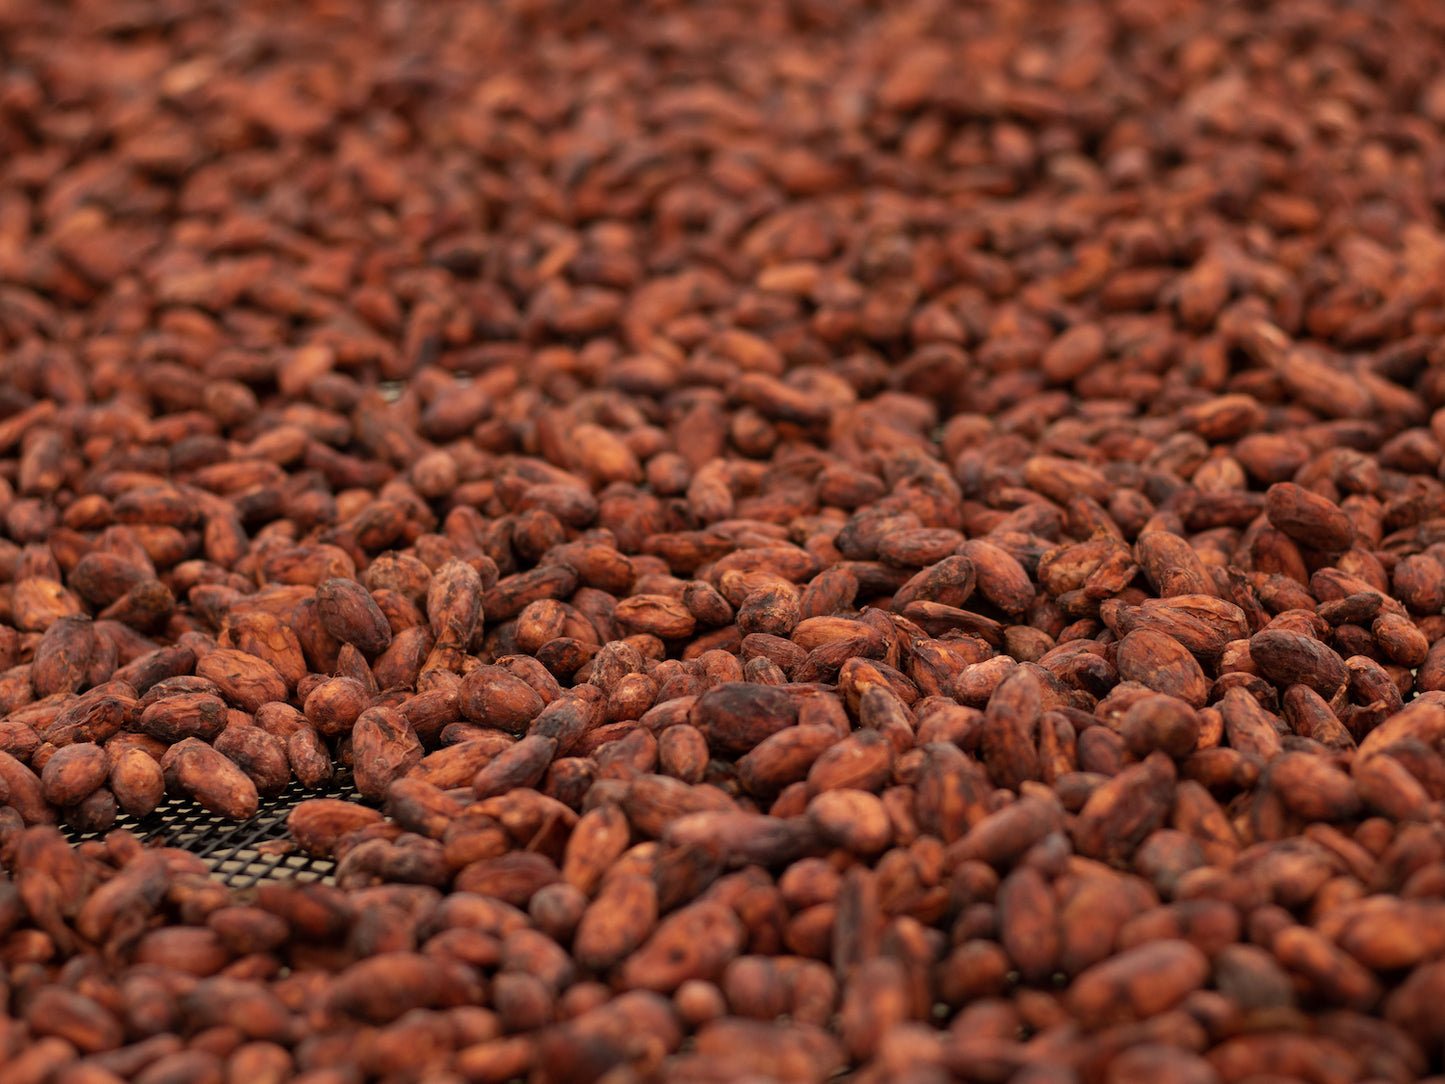 WE EMBRACE THE CACAO BEAN TO MAKE THE HEALTHIEST PRODUCTS